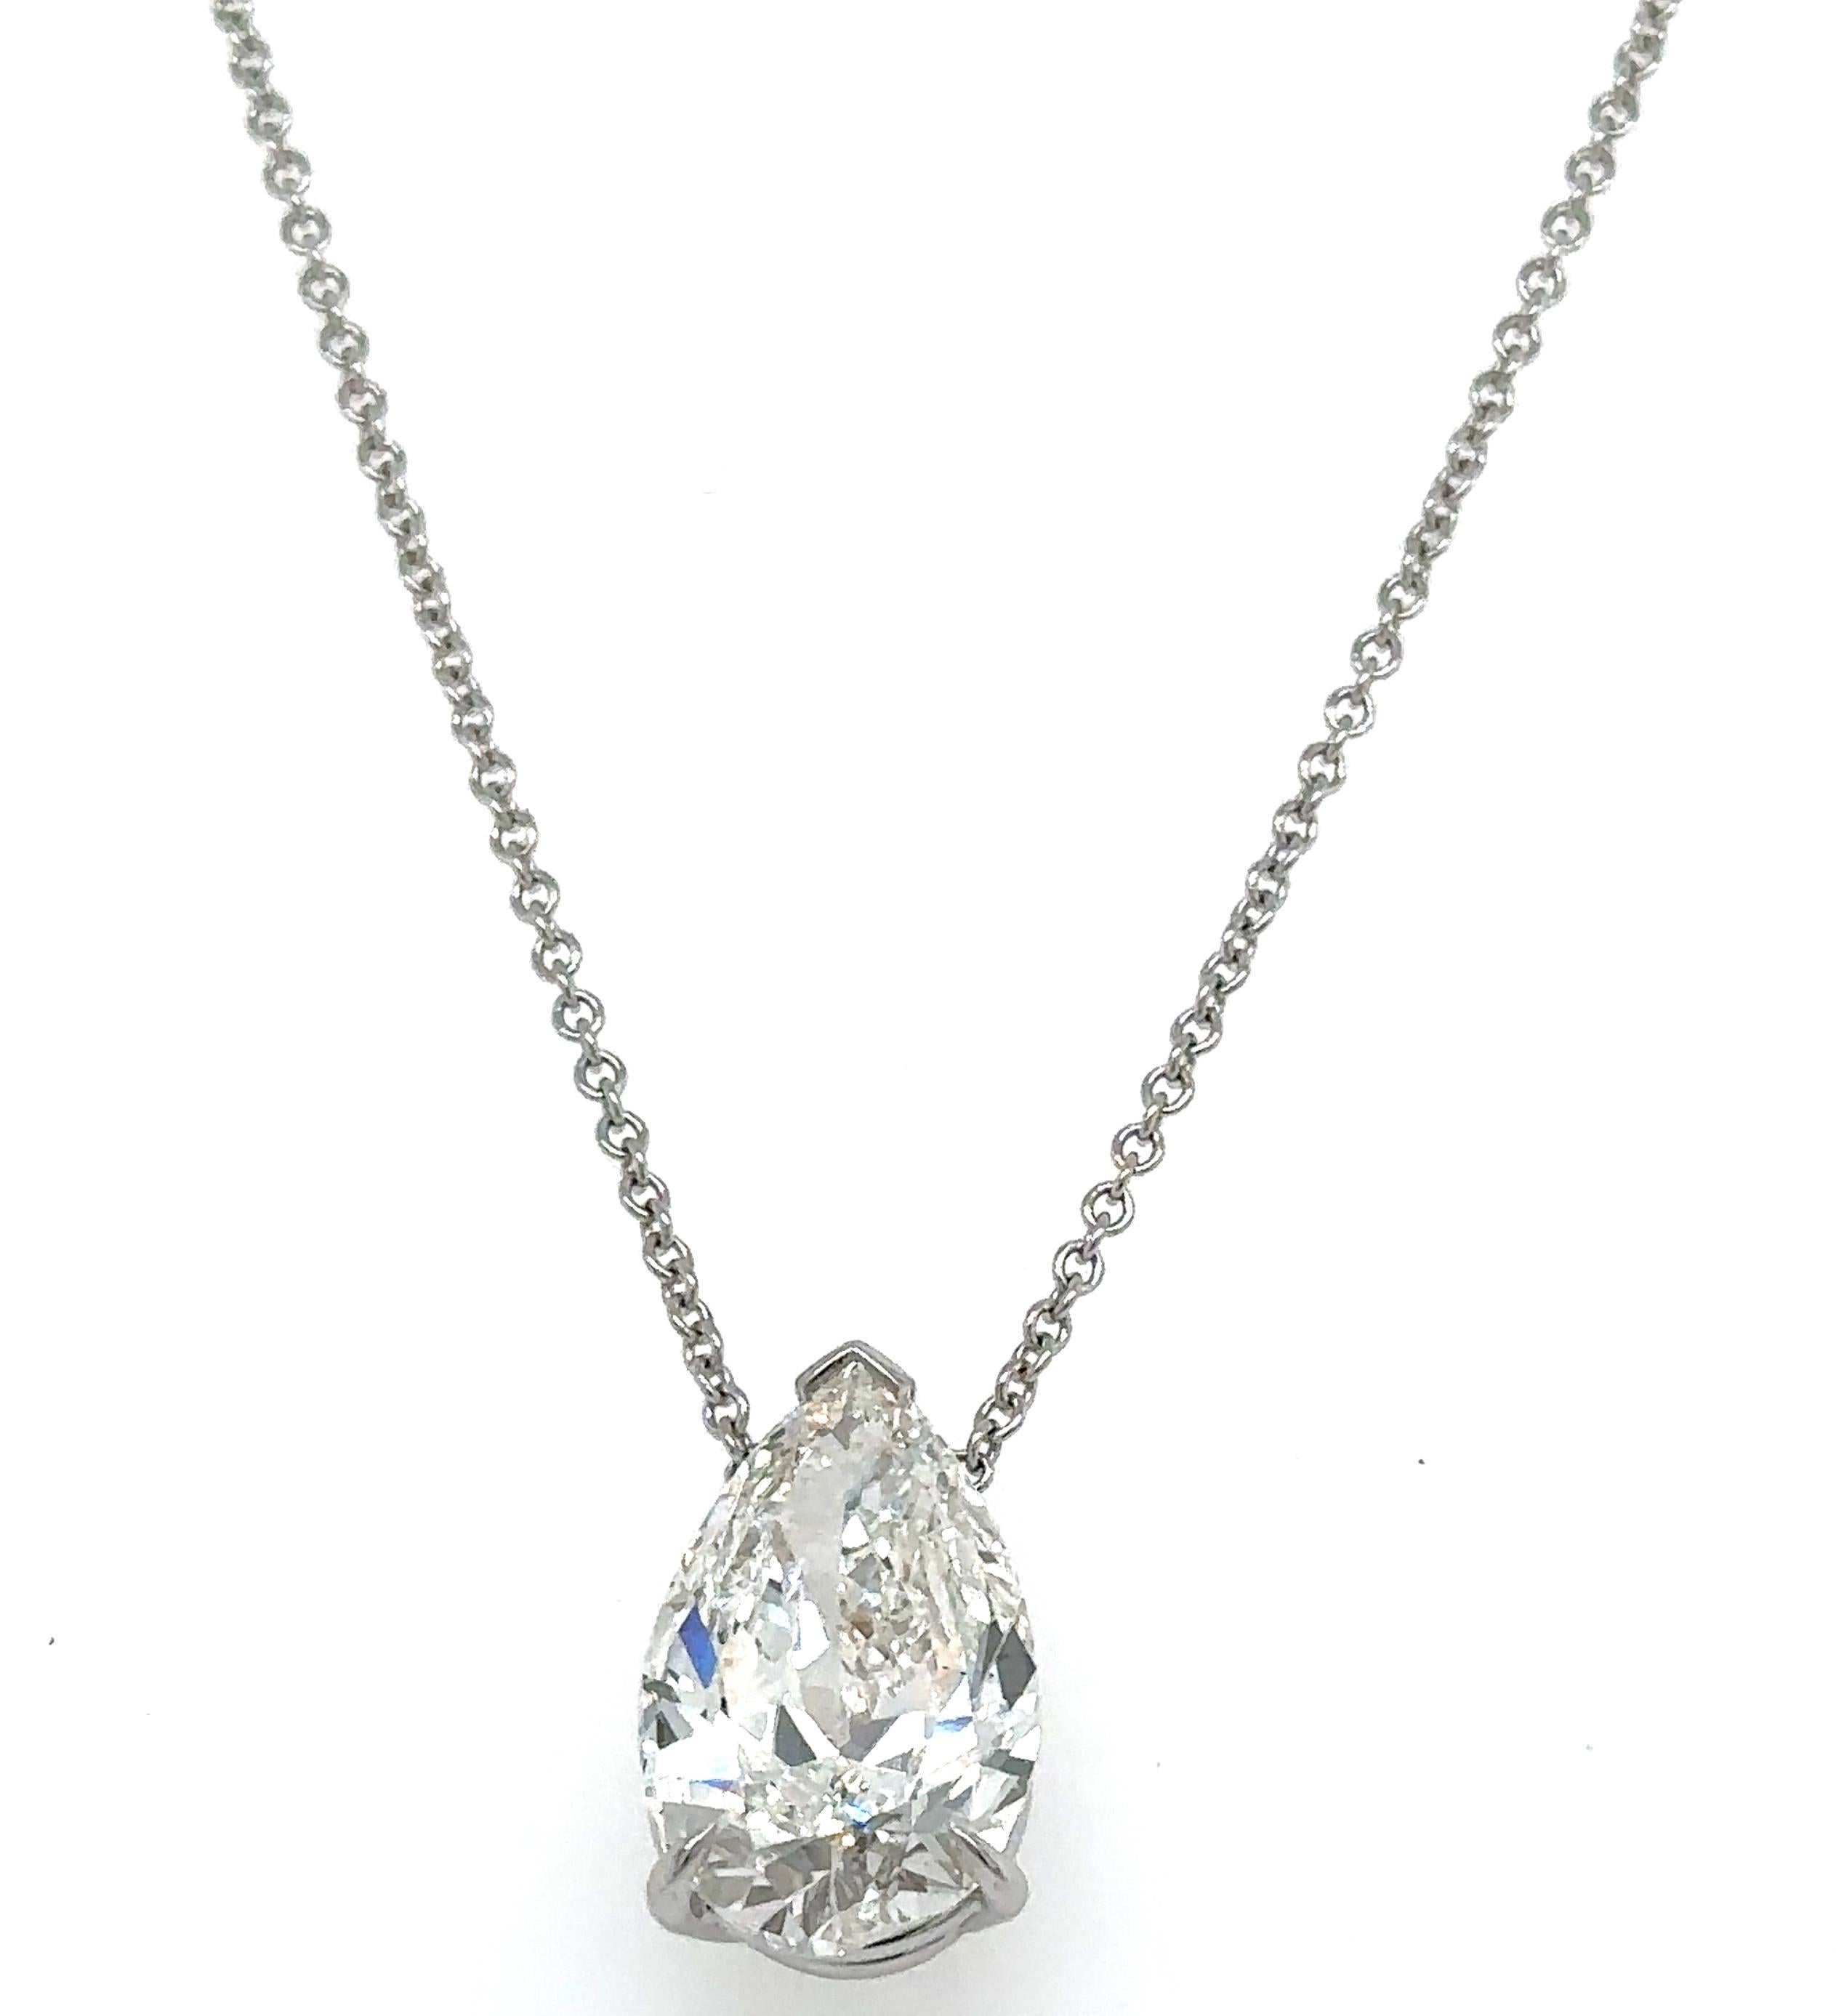 Adorn yourself with refinement and rarity by wearing this GIA Certified 3.68Carat Diamond Pear-shape Solitaire Pendant Necklace. Expertly cut and polished to emit an illuminating sparkle, this luxurious necklace is a symbol of prestige. Let its